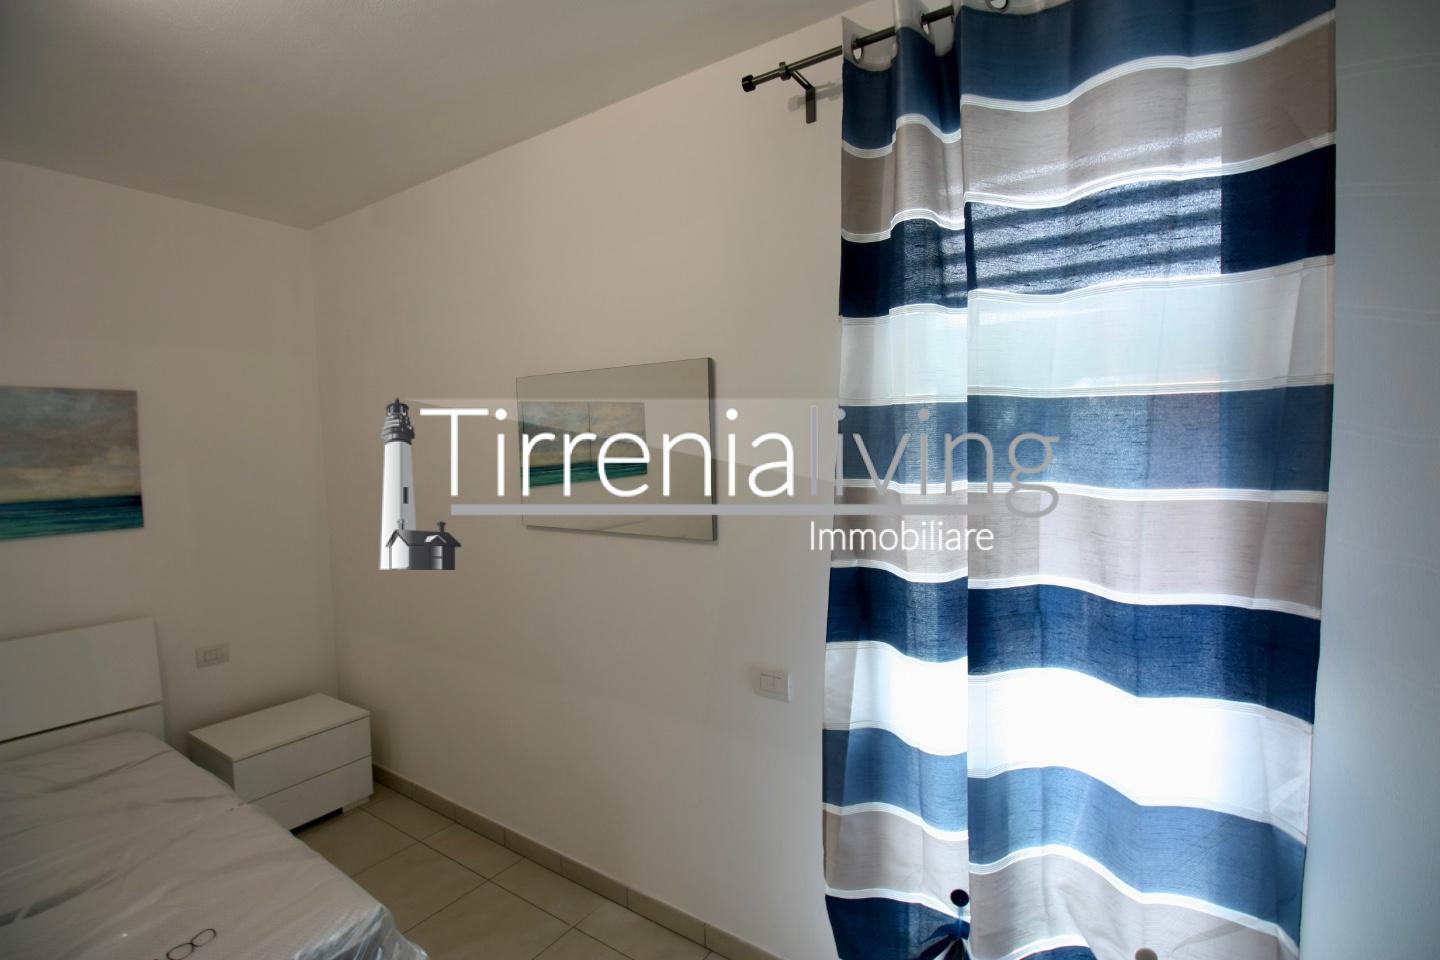 Apartment for rent, ref. A-505